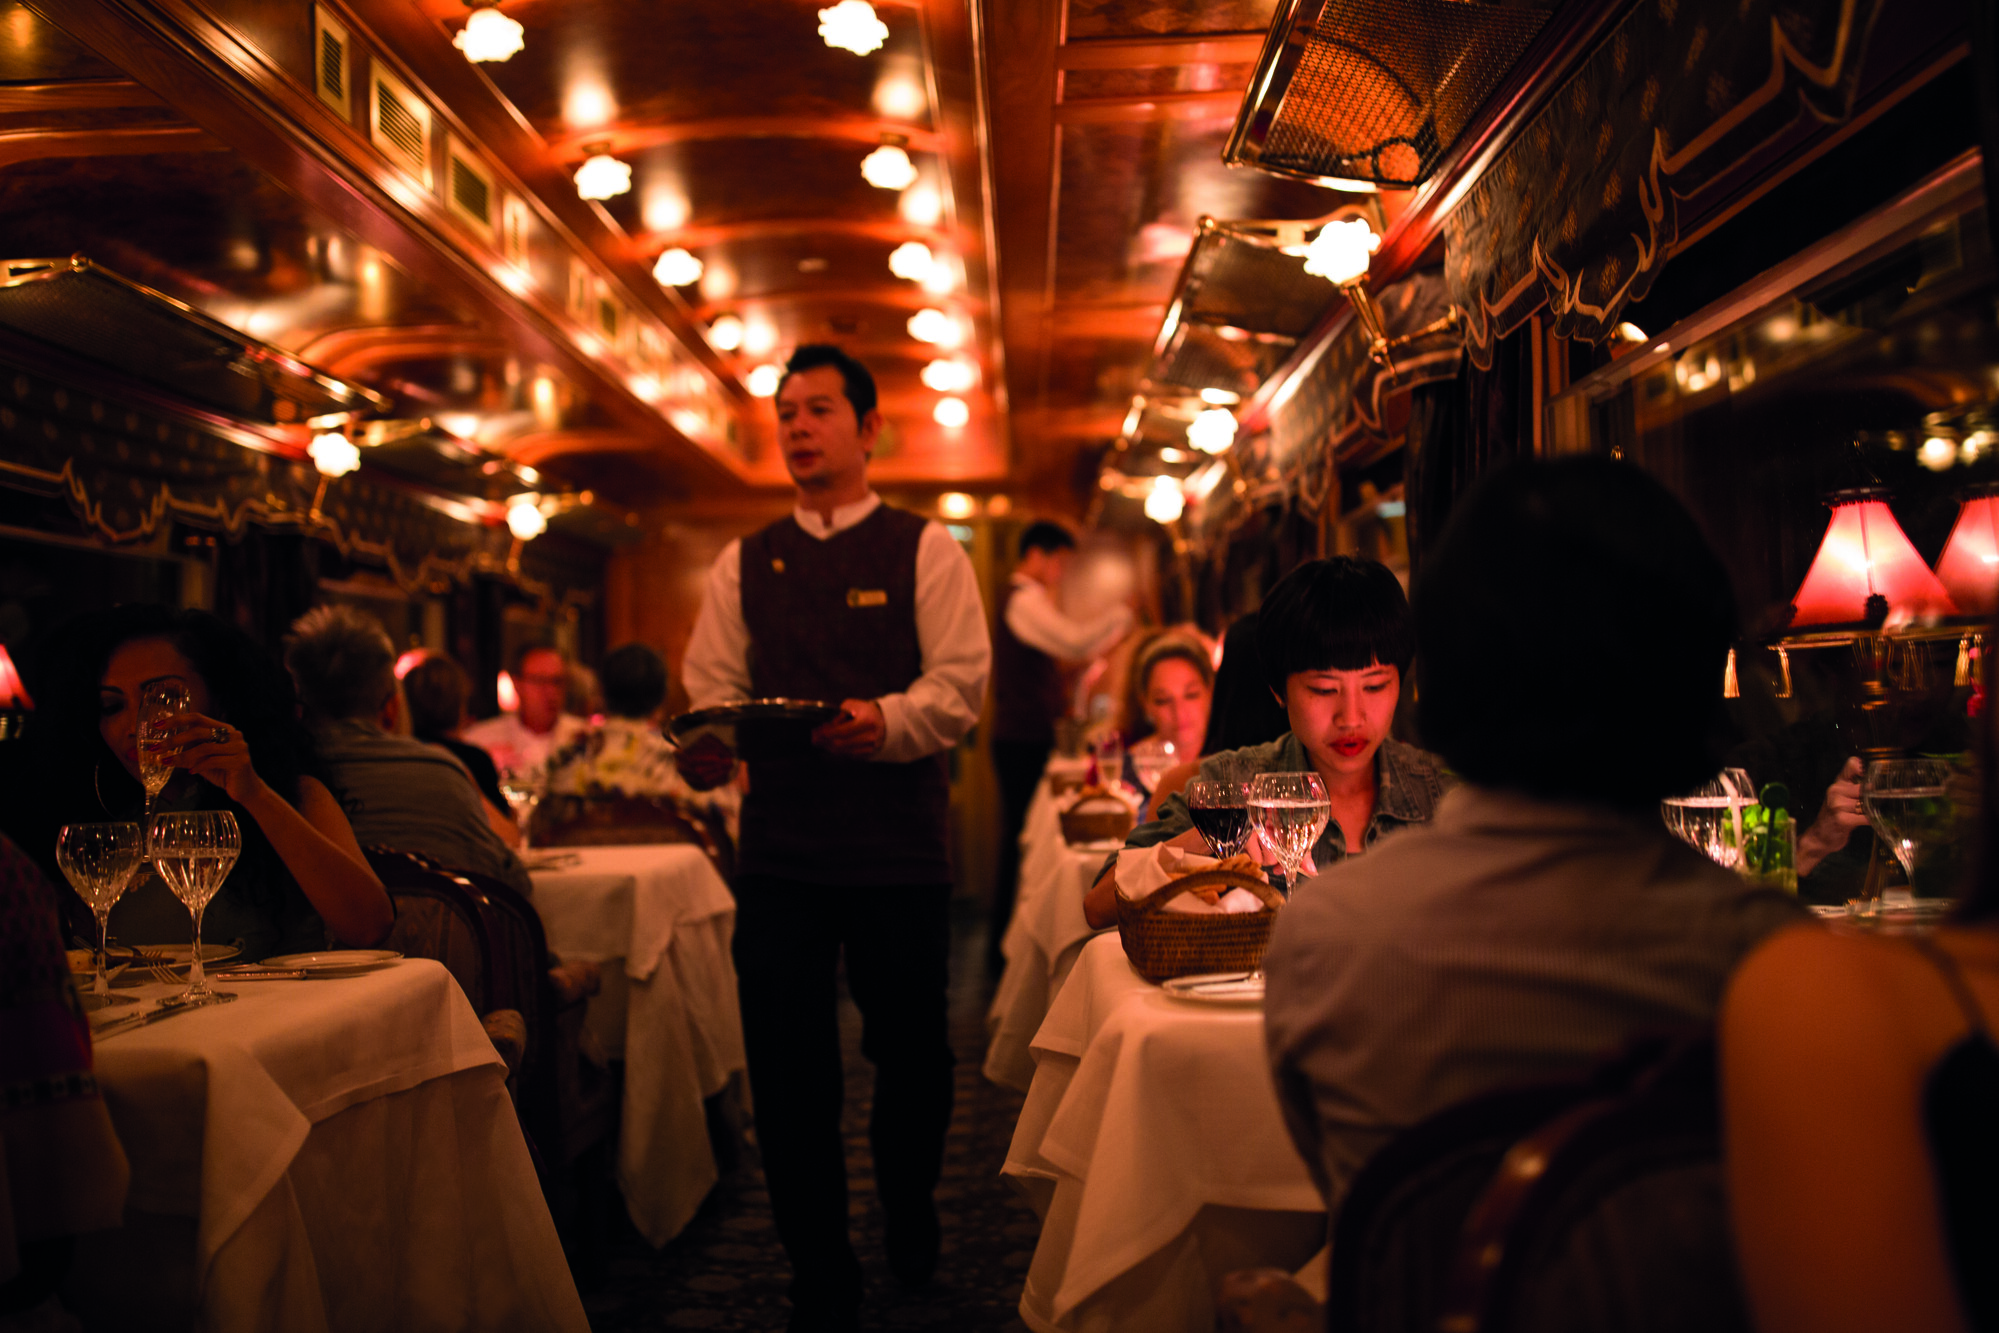 After a long hiatus, The Eastern & Oriental Express, A Belmond Train, Southeast Asia is proud to announce its much-anticipated return to the rails in February 2024.